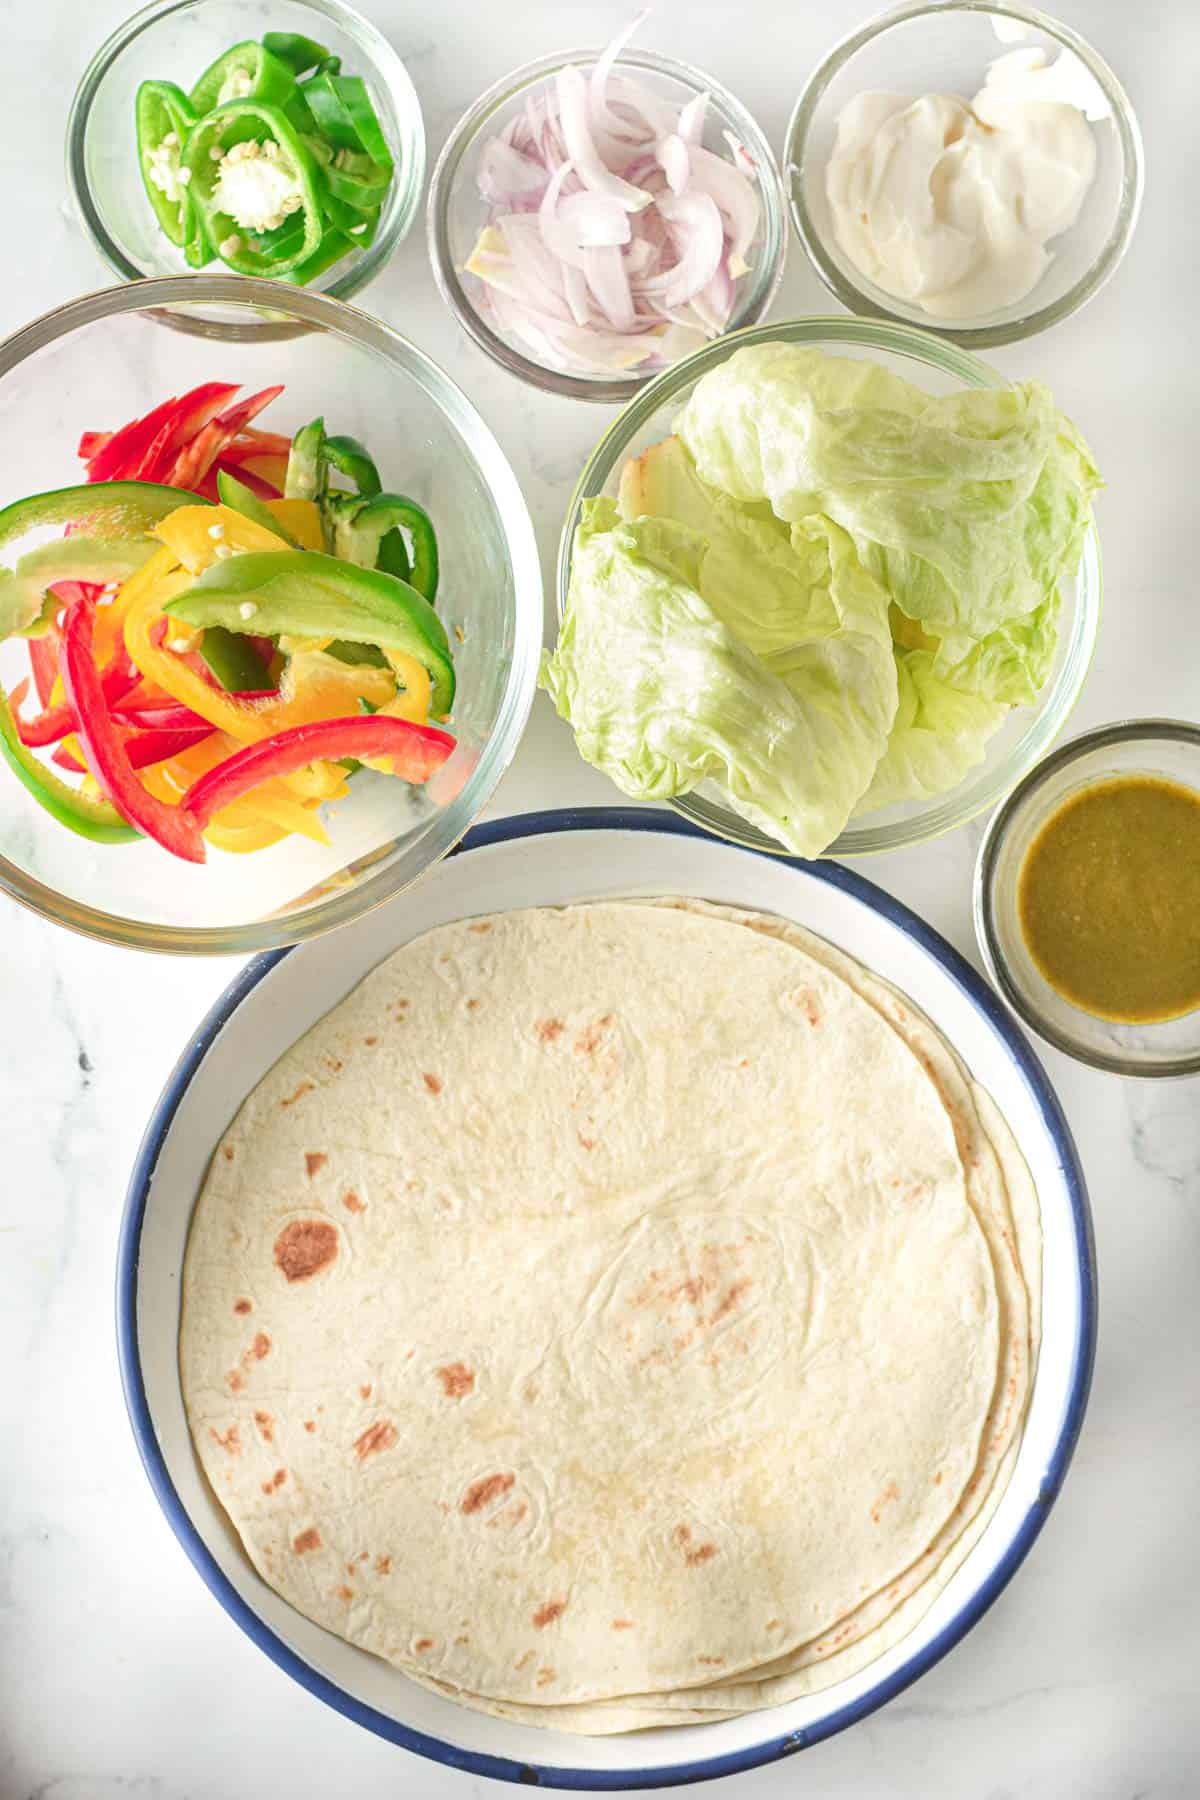 A wrap with tortillas, salsa, and other ingredients.